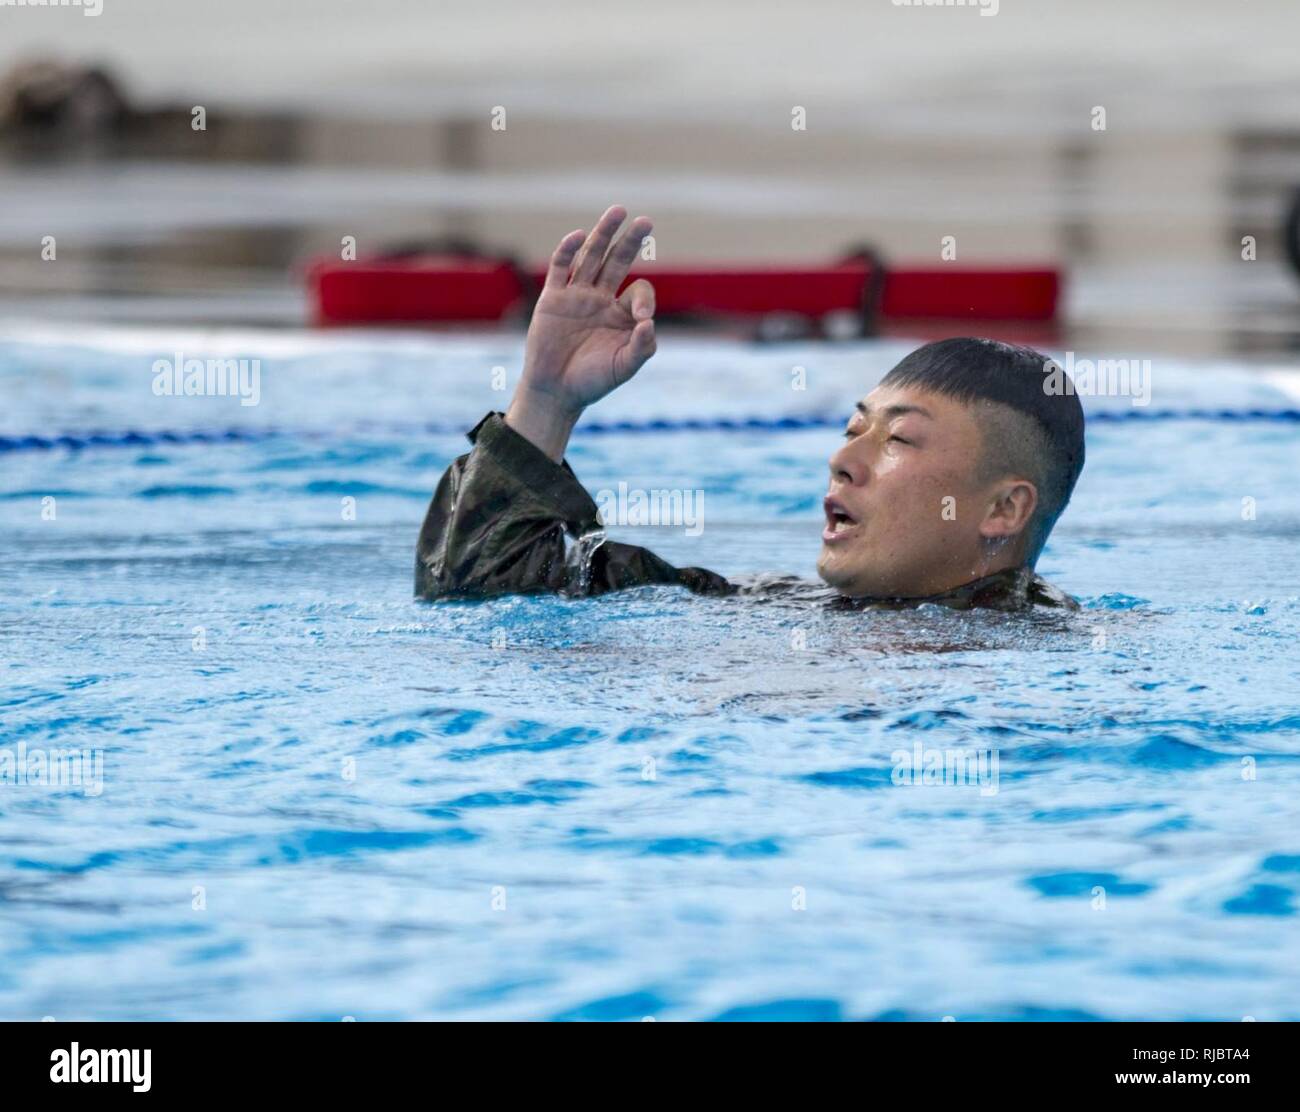 MARINE CORPS BASE CAMP PENDLETON, Calif. – A Japan Ground Self Defense Force soldier participates in a Marine Corps intermediate swim qualification as part of exercise Iron Fist Jan. 16, 2018. Iron Fist brings together U.S. Marines from the 11th Marine Expeditionary Unit and Soldiers from the Japan Ground Self Defense Force, Western Army Infantry Regiment, to improve bilateral planning, communicating, and conduct combined amphibious operations. Stock Photo